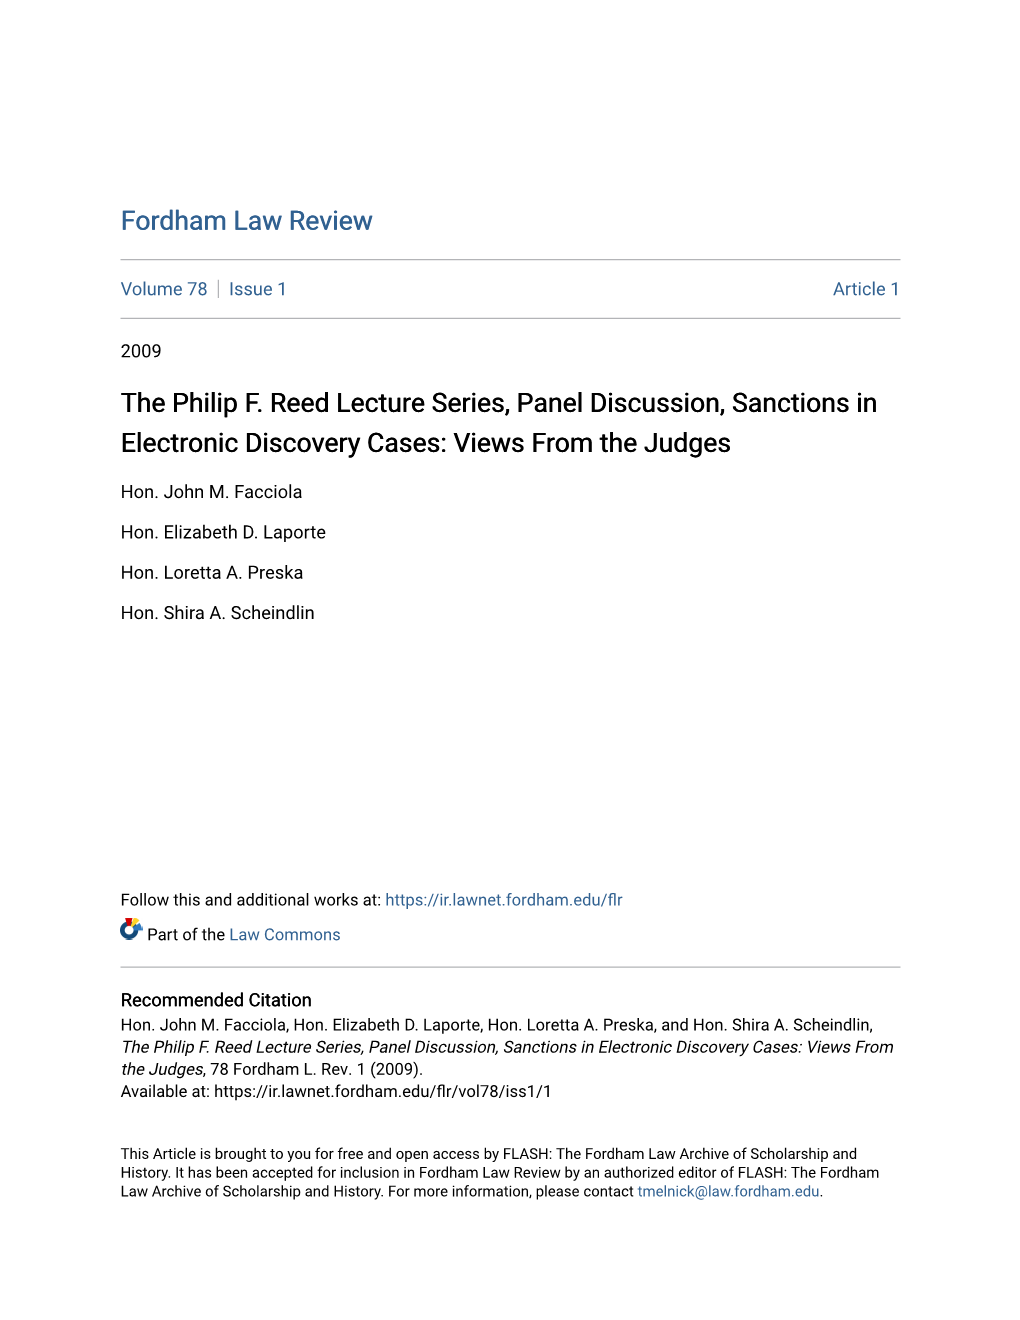 The Philip F. Reed Lecture Series, Panel Discussion, Sanctions in Electronic Discovery Cases: Views from the Judges